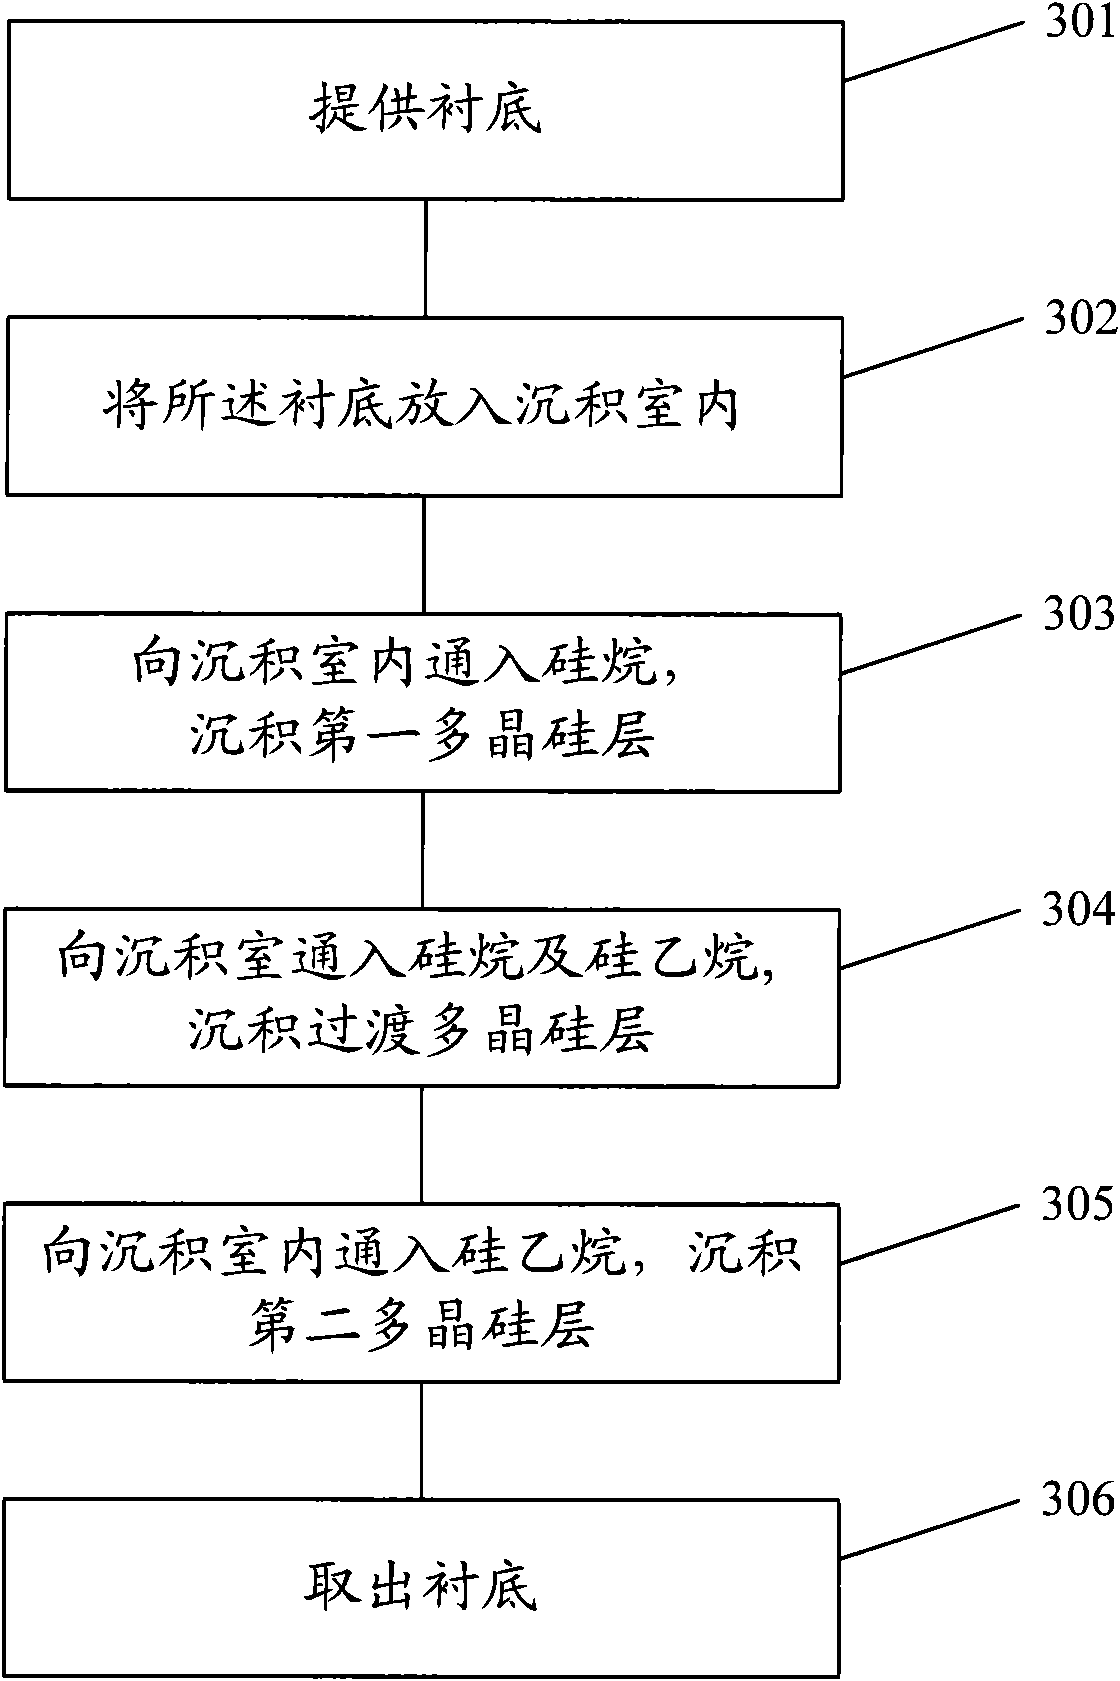 Polysilicon membrane forming method and polysilicon gate forming method